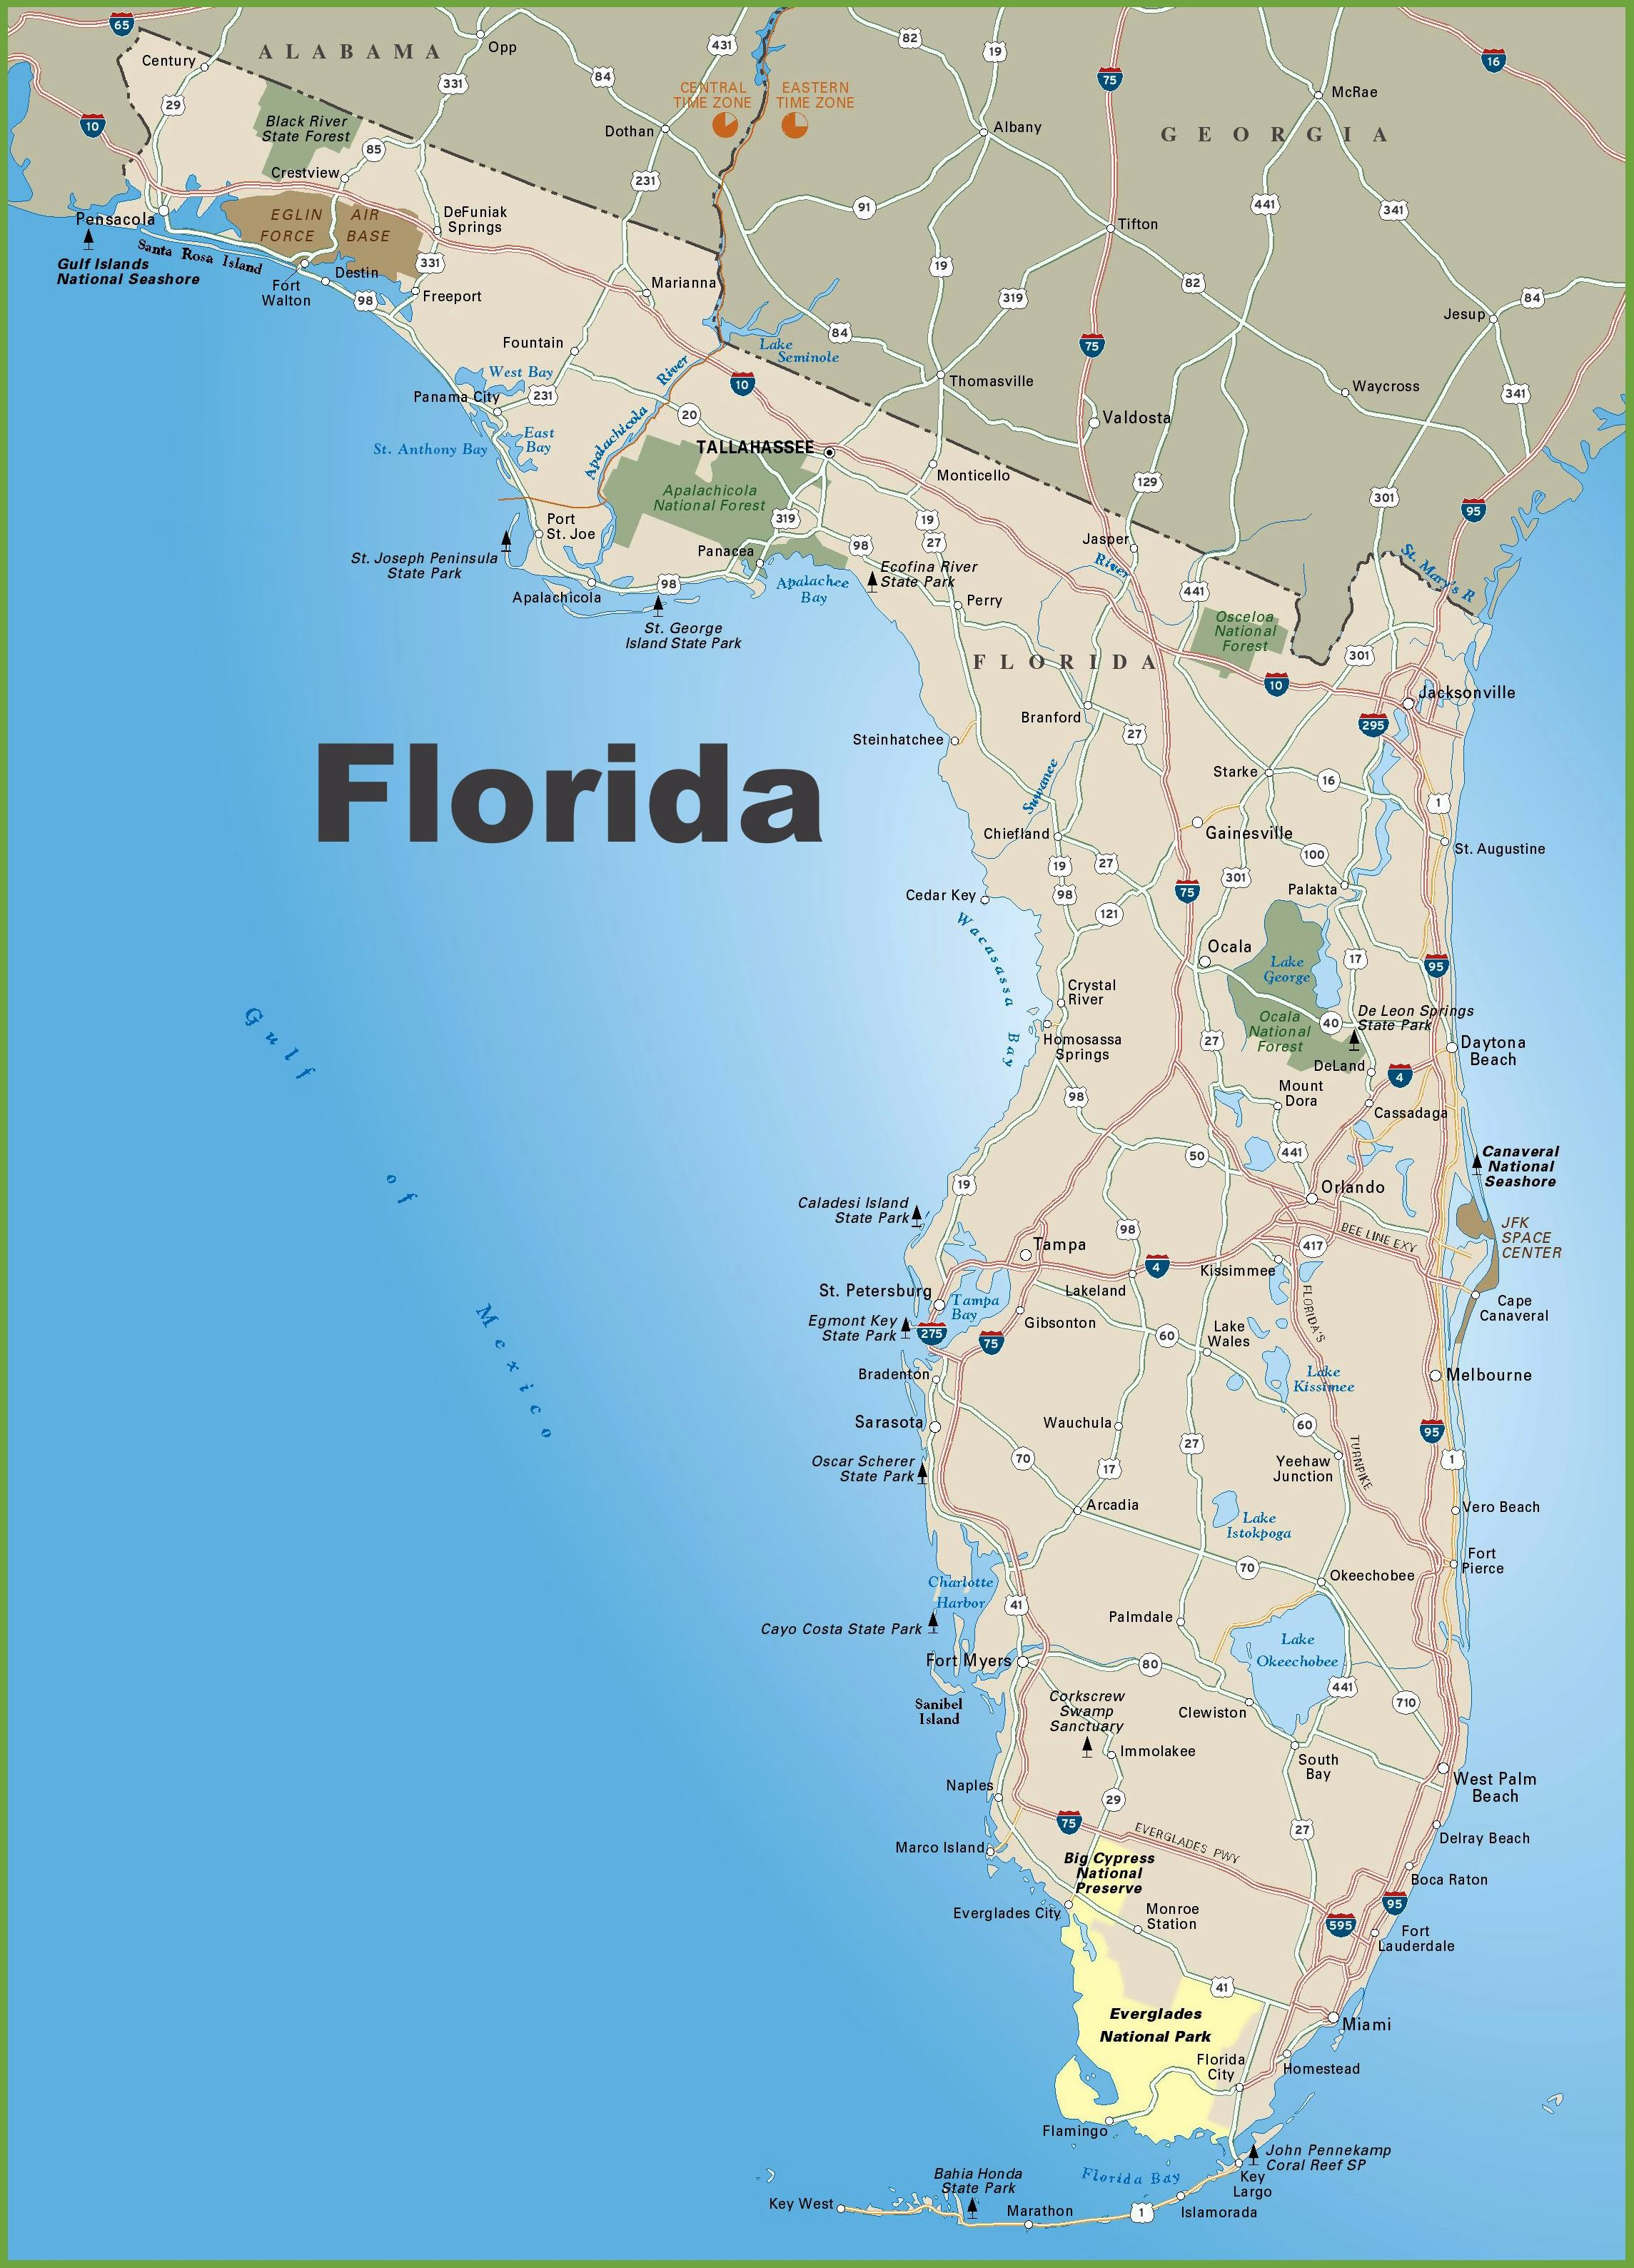 Large Florida Maps For Free Download And Print | High-Resolution And - Texas Gulf Coast Beaches Map